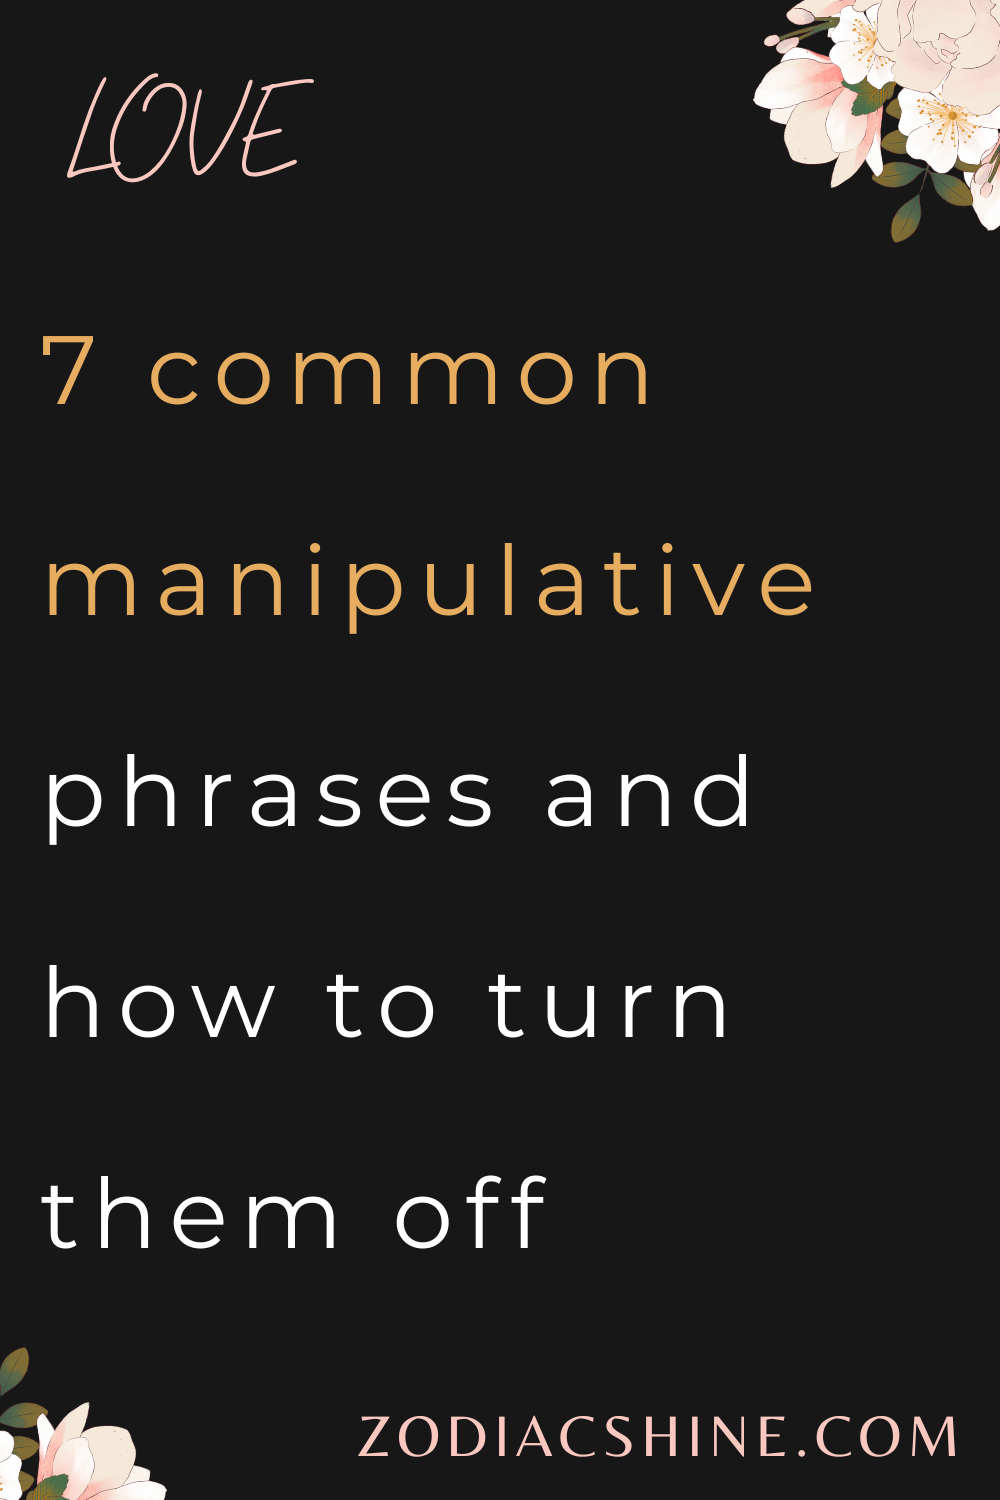 7 common manipulative phrases and how to turn them off